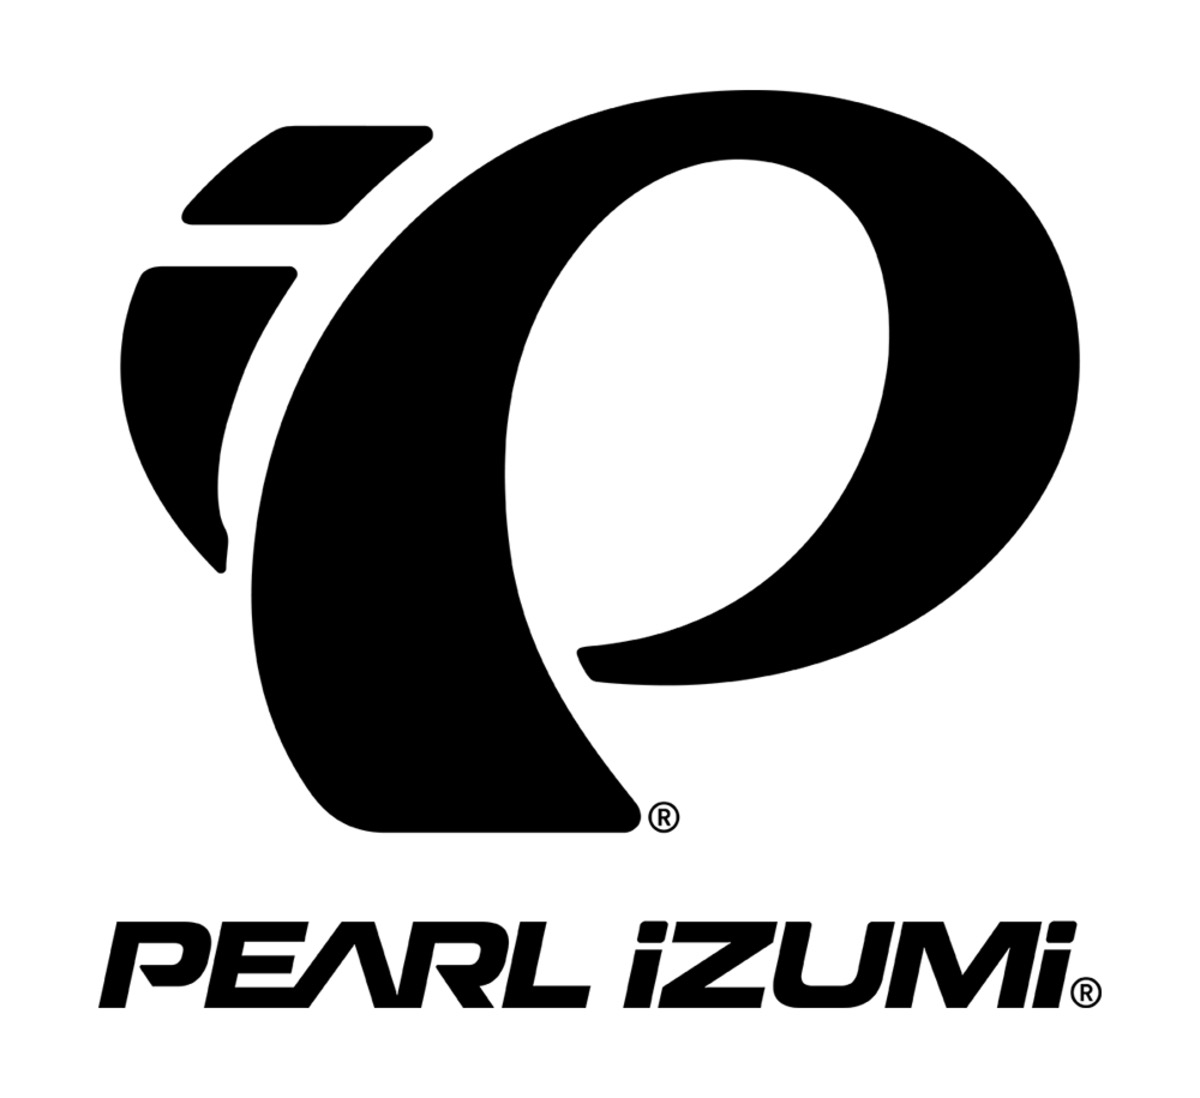 Link to the Pearl Izumi home page